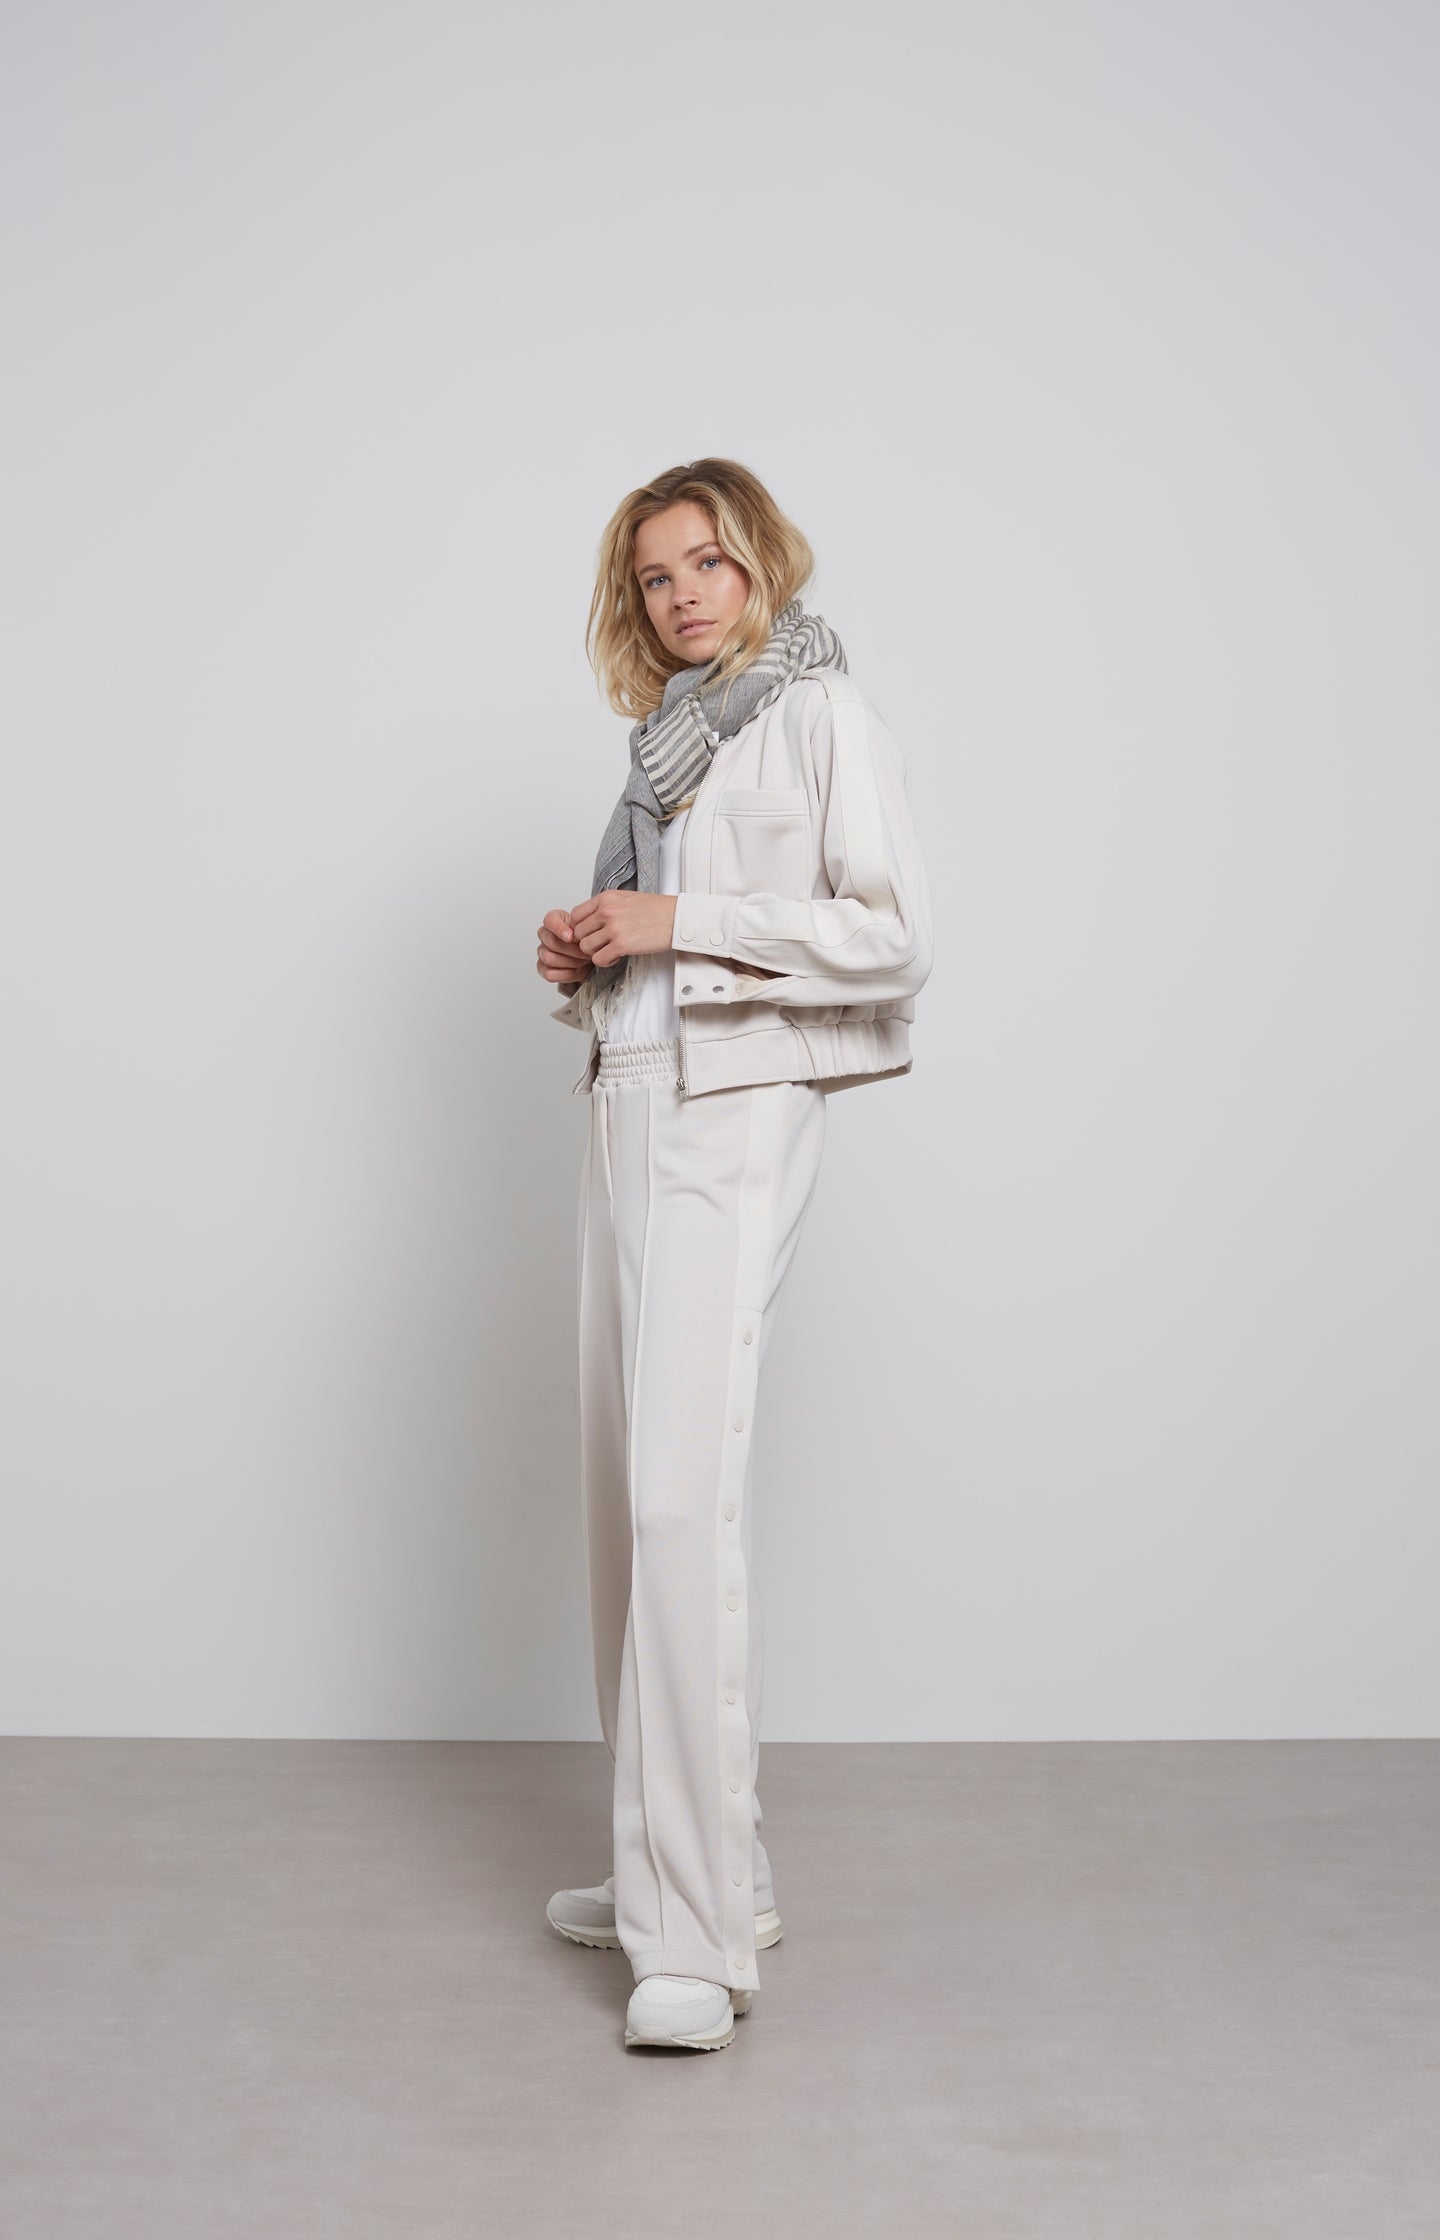 Jersey wide leg trousers with elastic waist and buttons